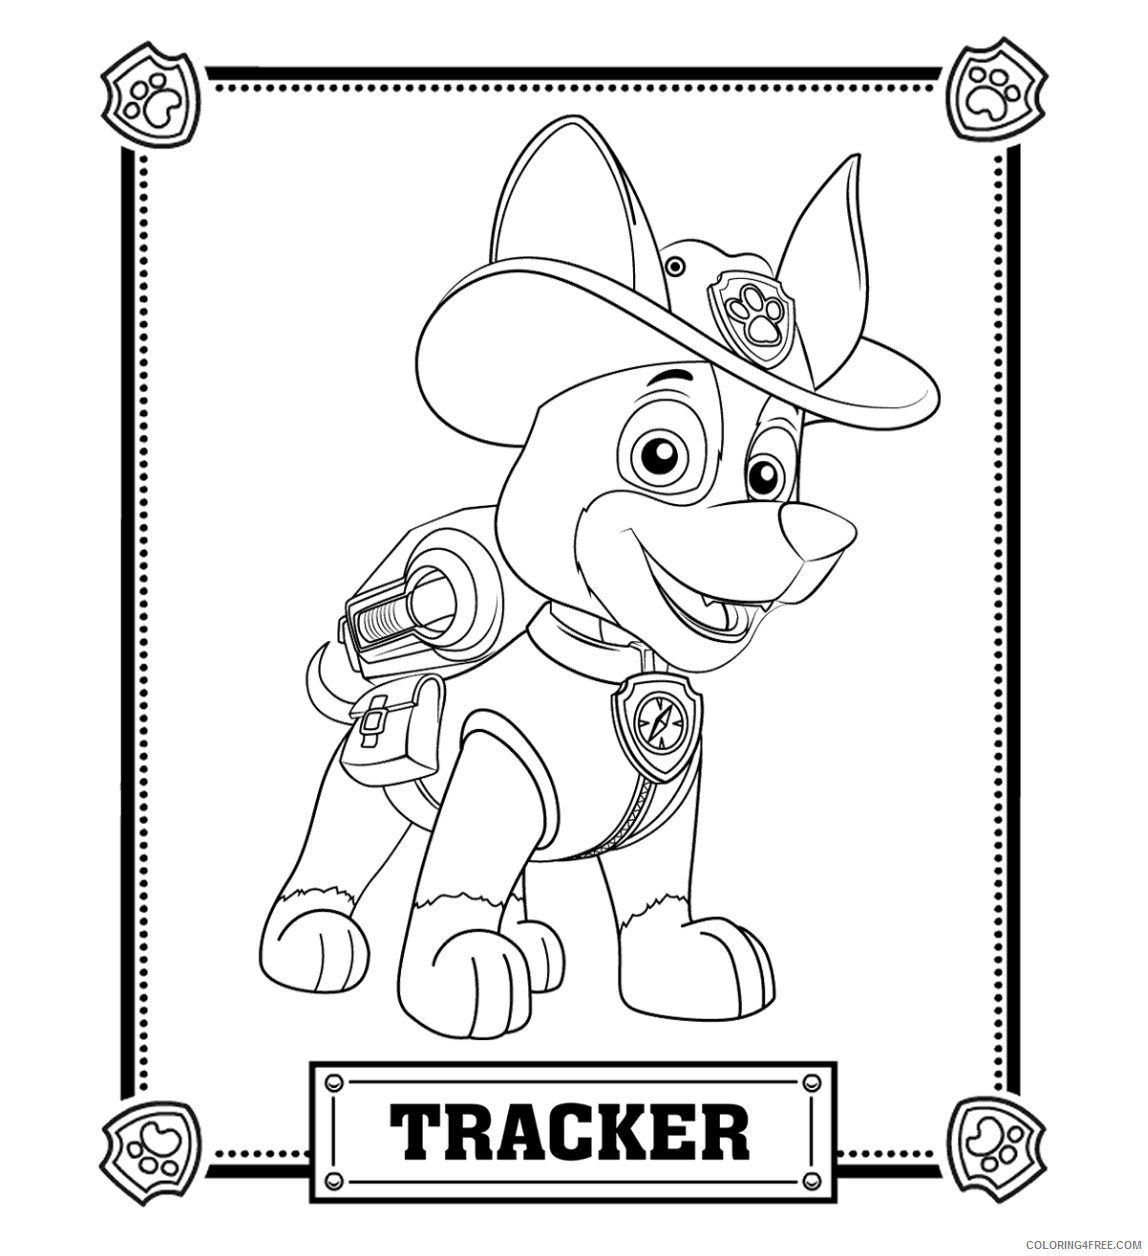 paw patrol coloring pages tracker Coloring4free